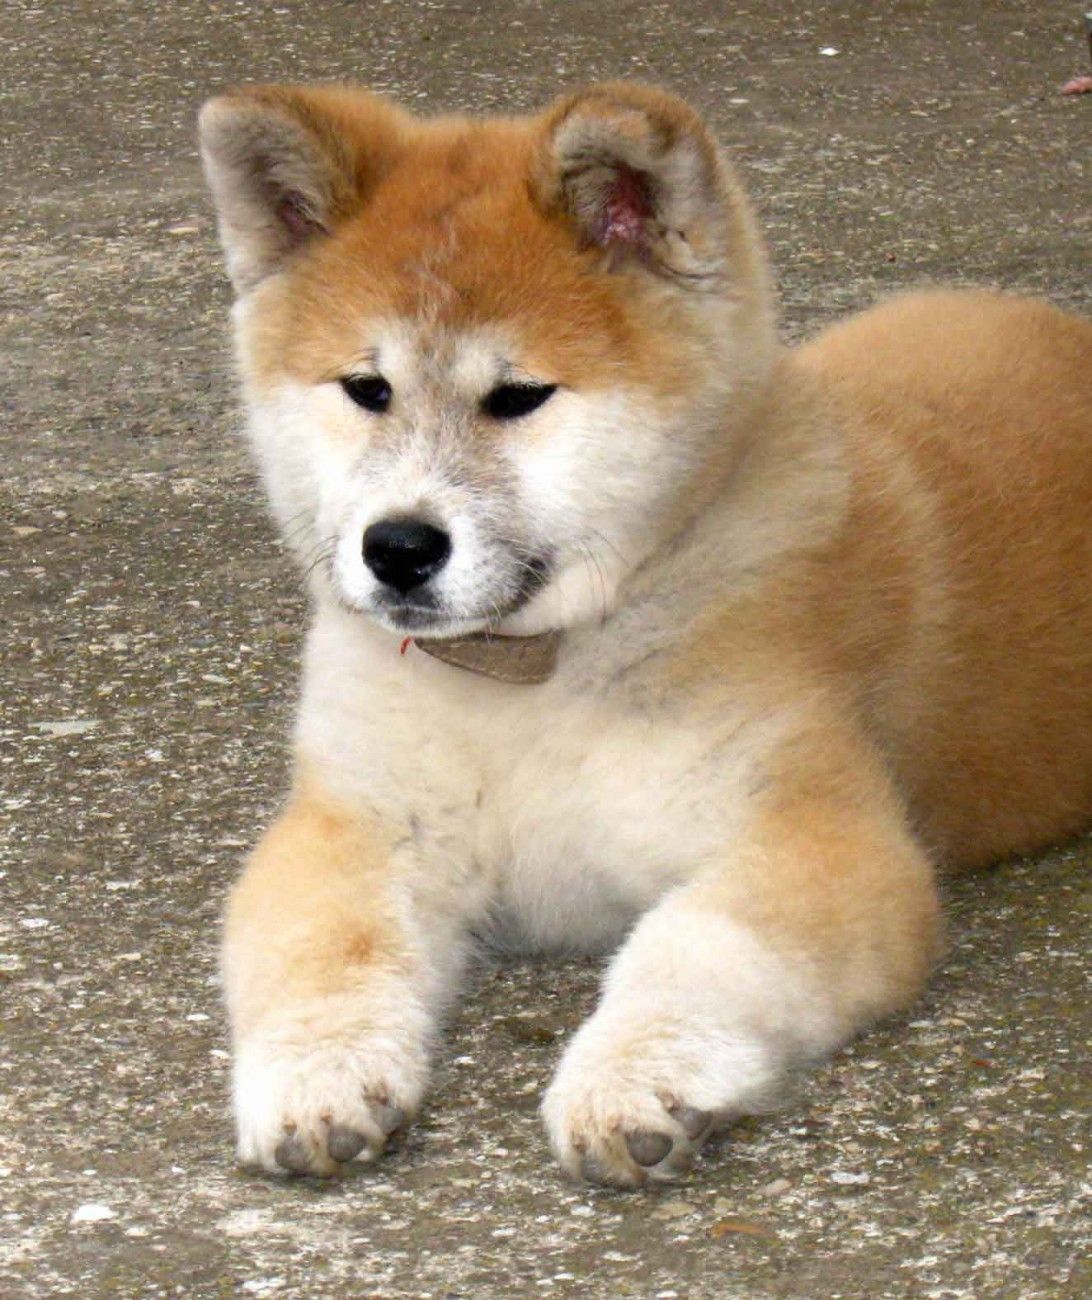 Japanese Akita Inu Puppy lying down on the ground